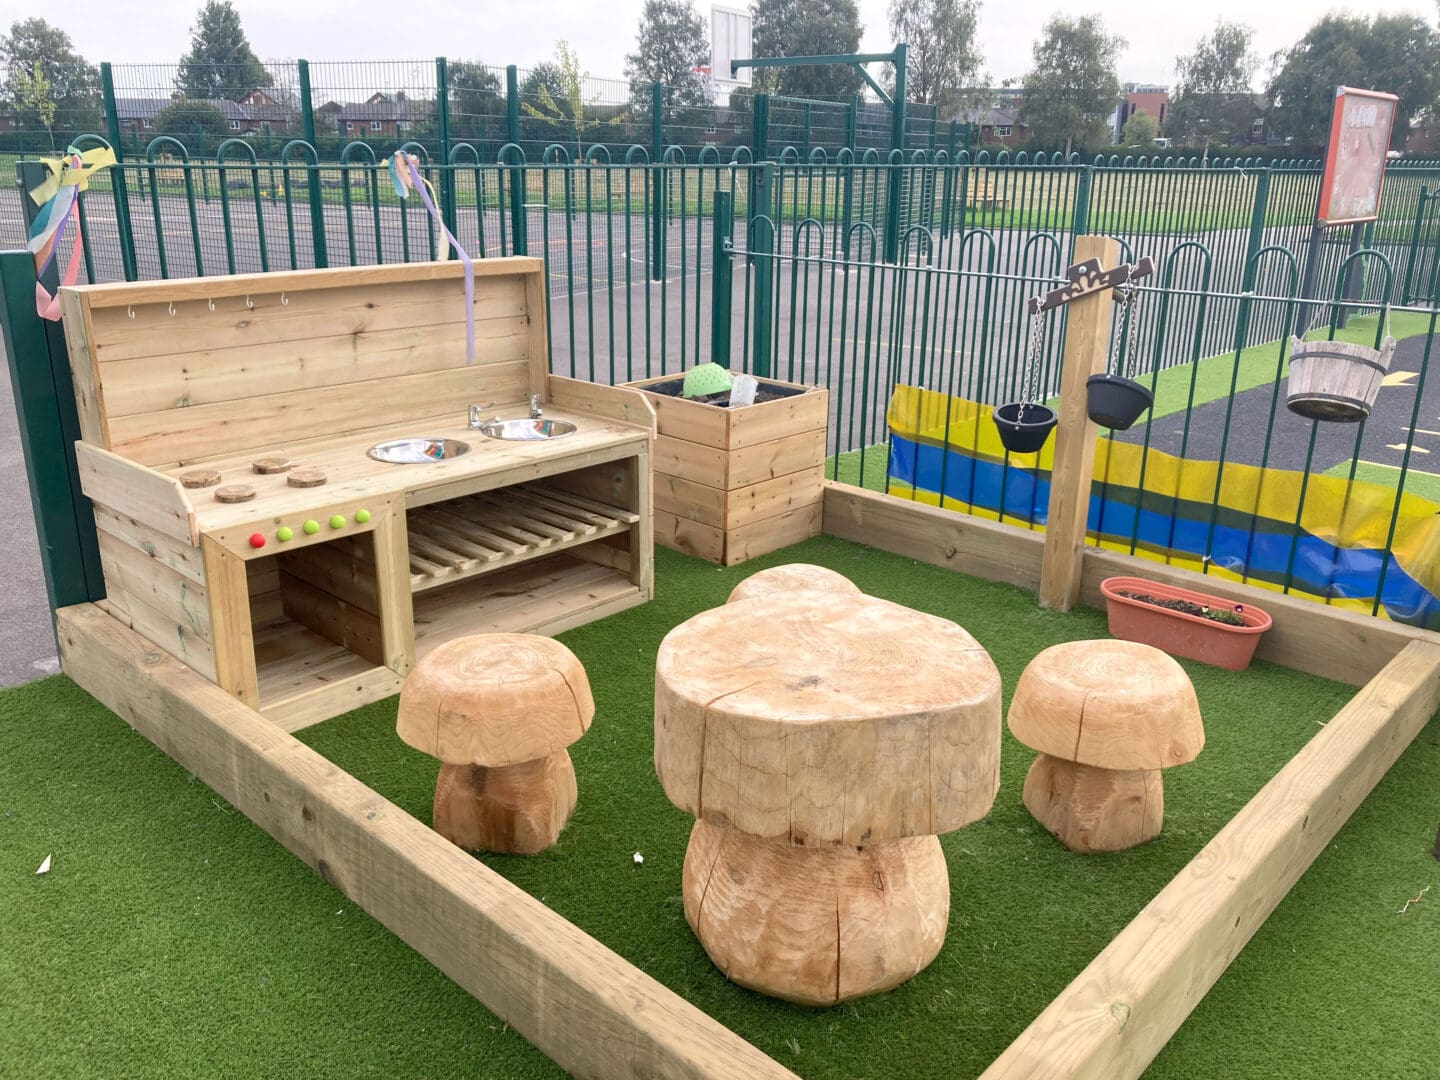 meadowside-primary-messy-play-area-3